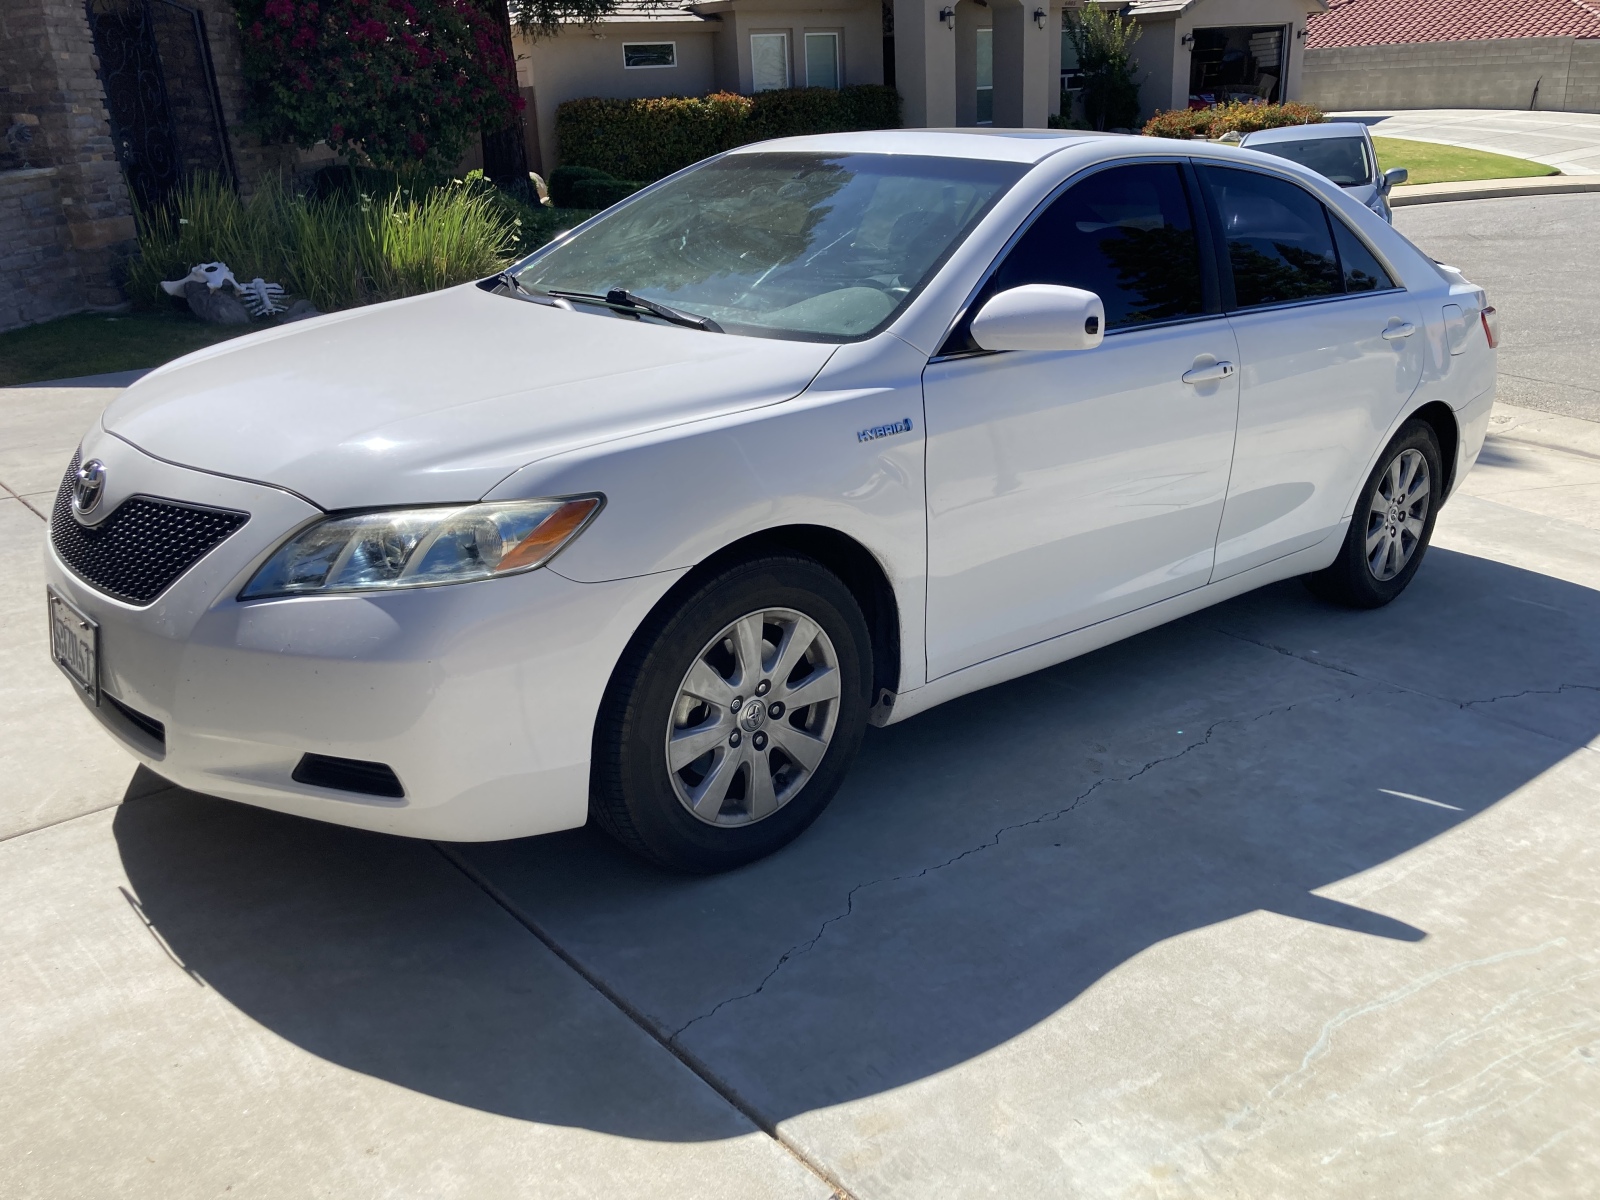 For Sale: Toyota Camry Hybrid for “Trade” - photo0